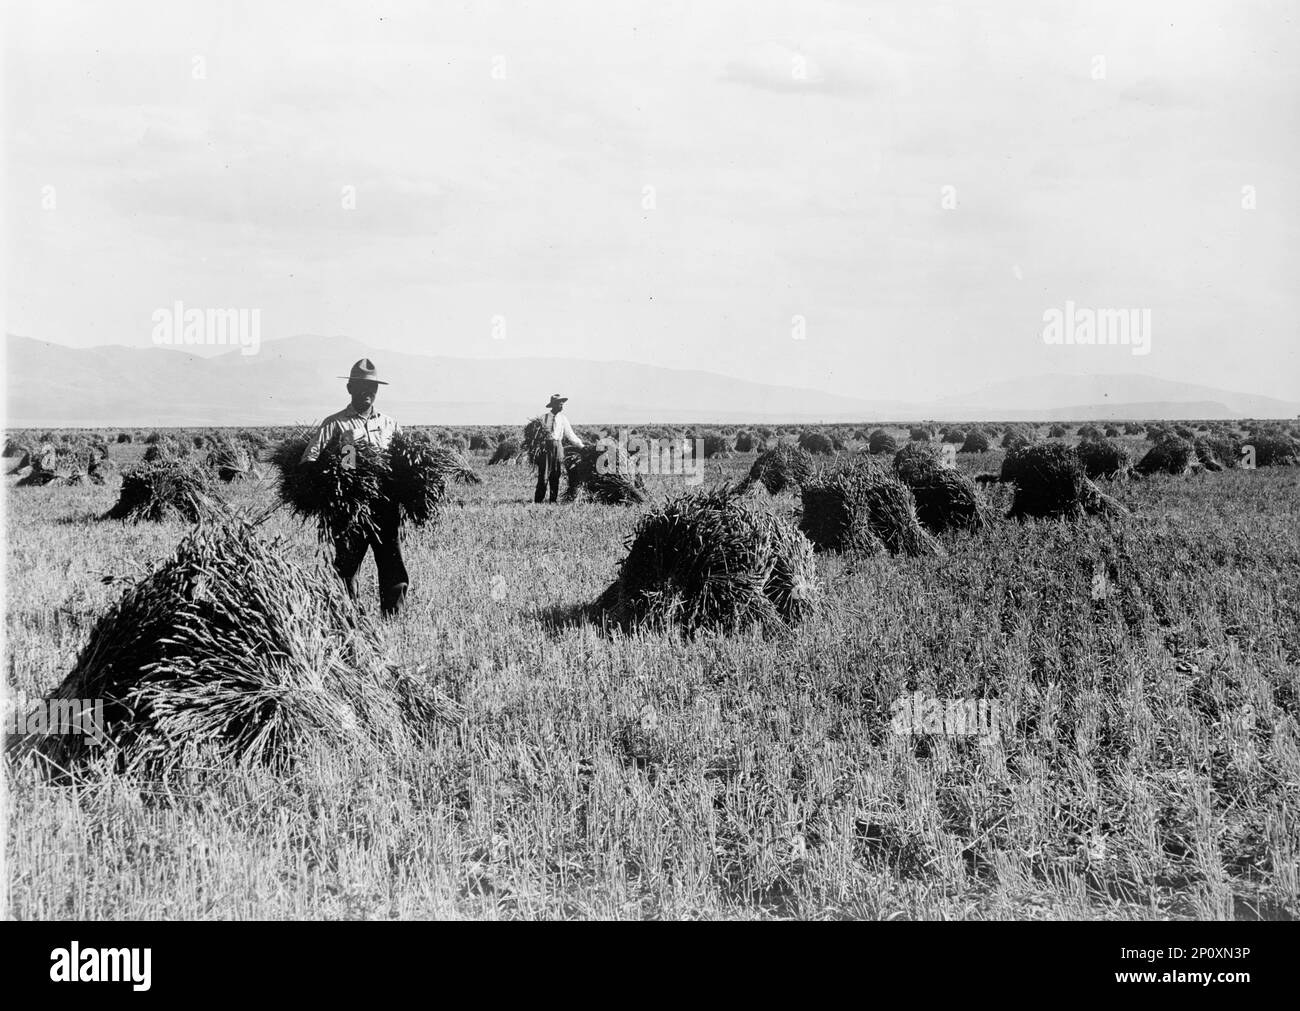 Minidoka Project - U.S. Reclamation Bureau. Minidoka Desert On Year After Irrigation By Government, 1912. The Minidoka Project was a series of public works implemented in order to control the flow of the Snake River in Wyoming and Idaho, supplying irrigation water to farmlands in Idaho. Stock Photo